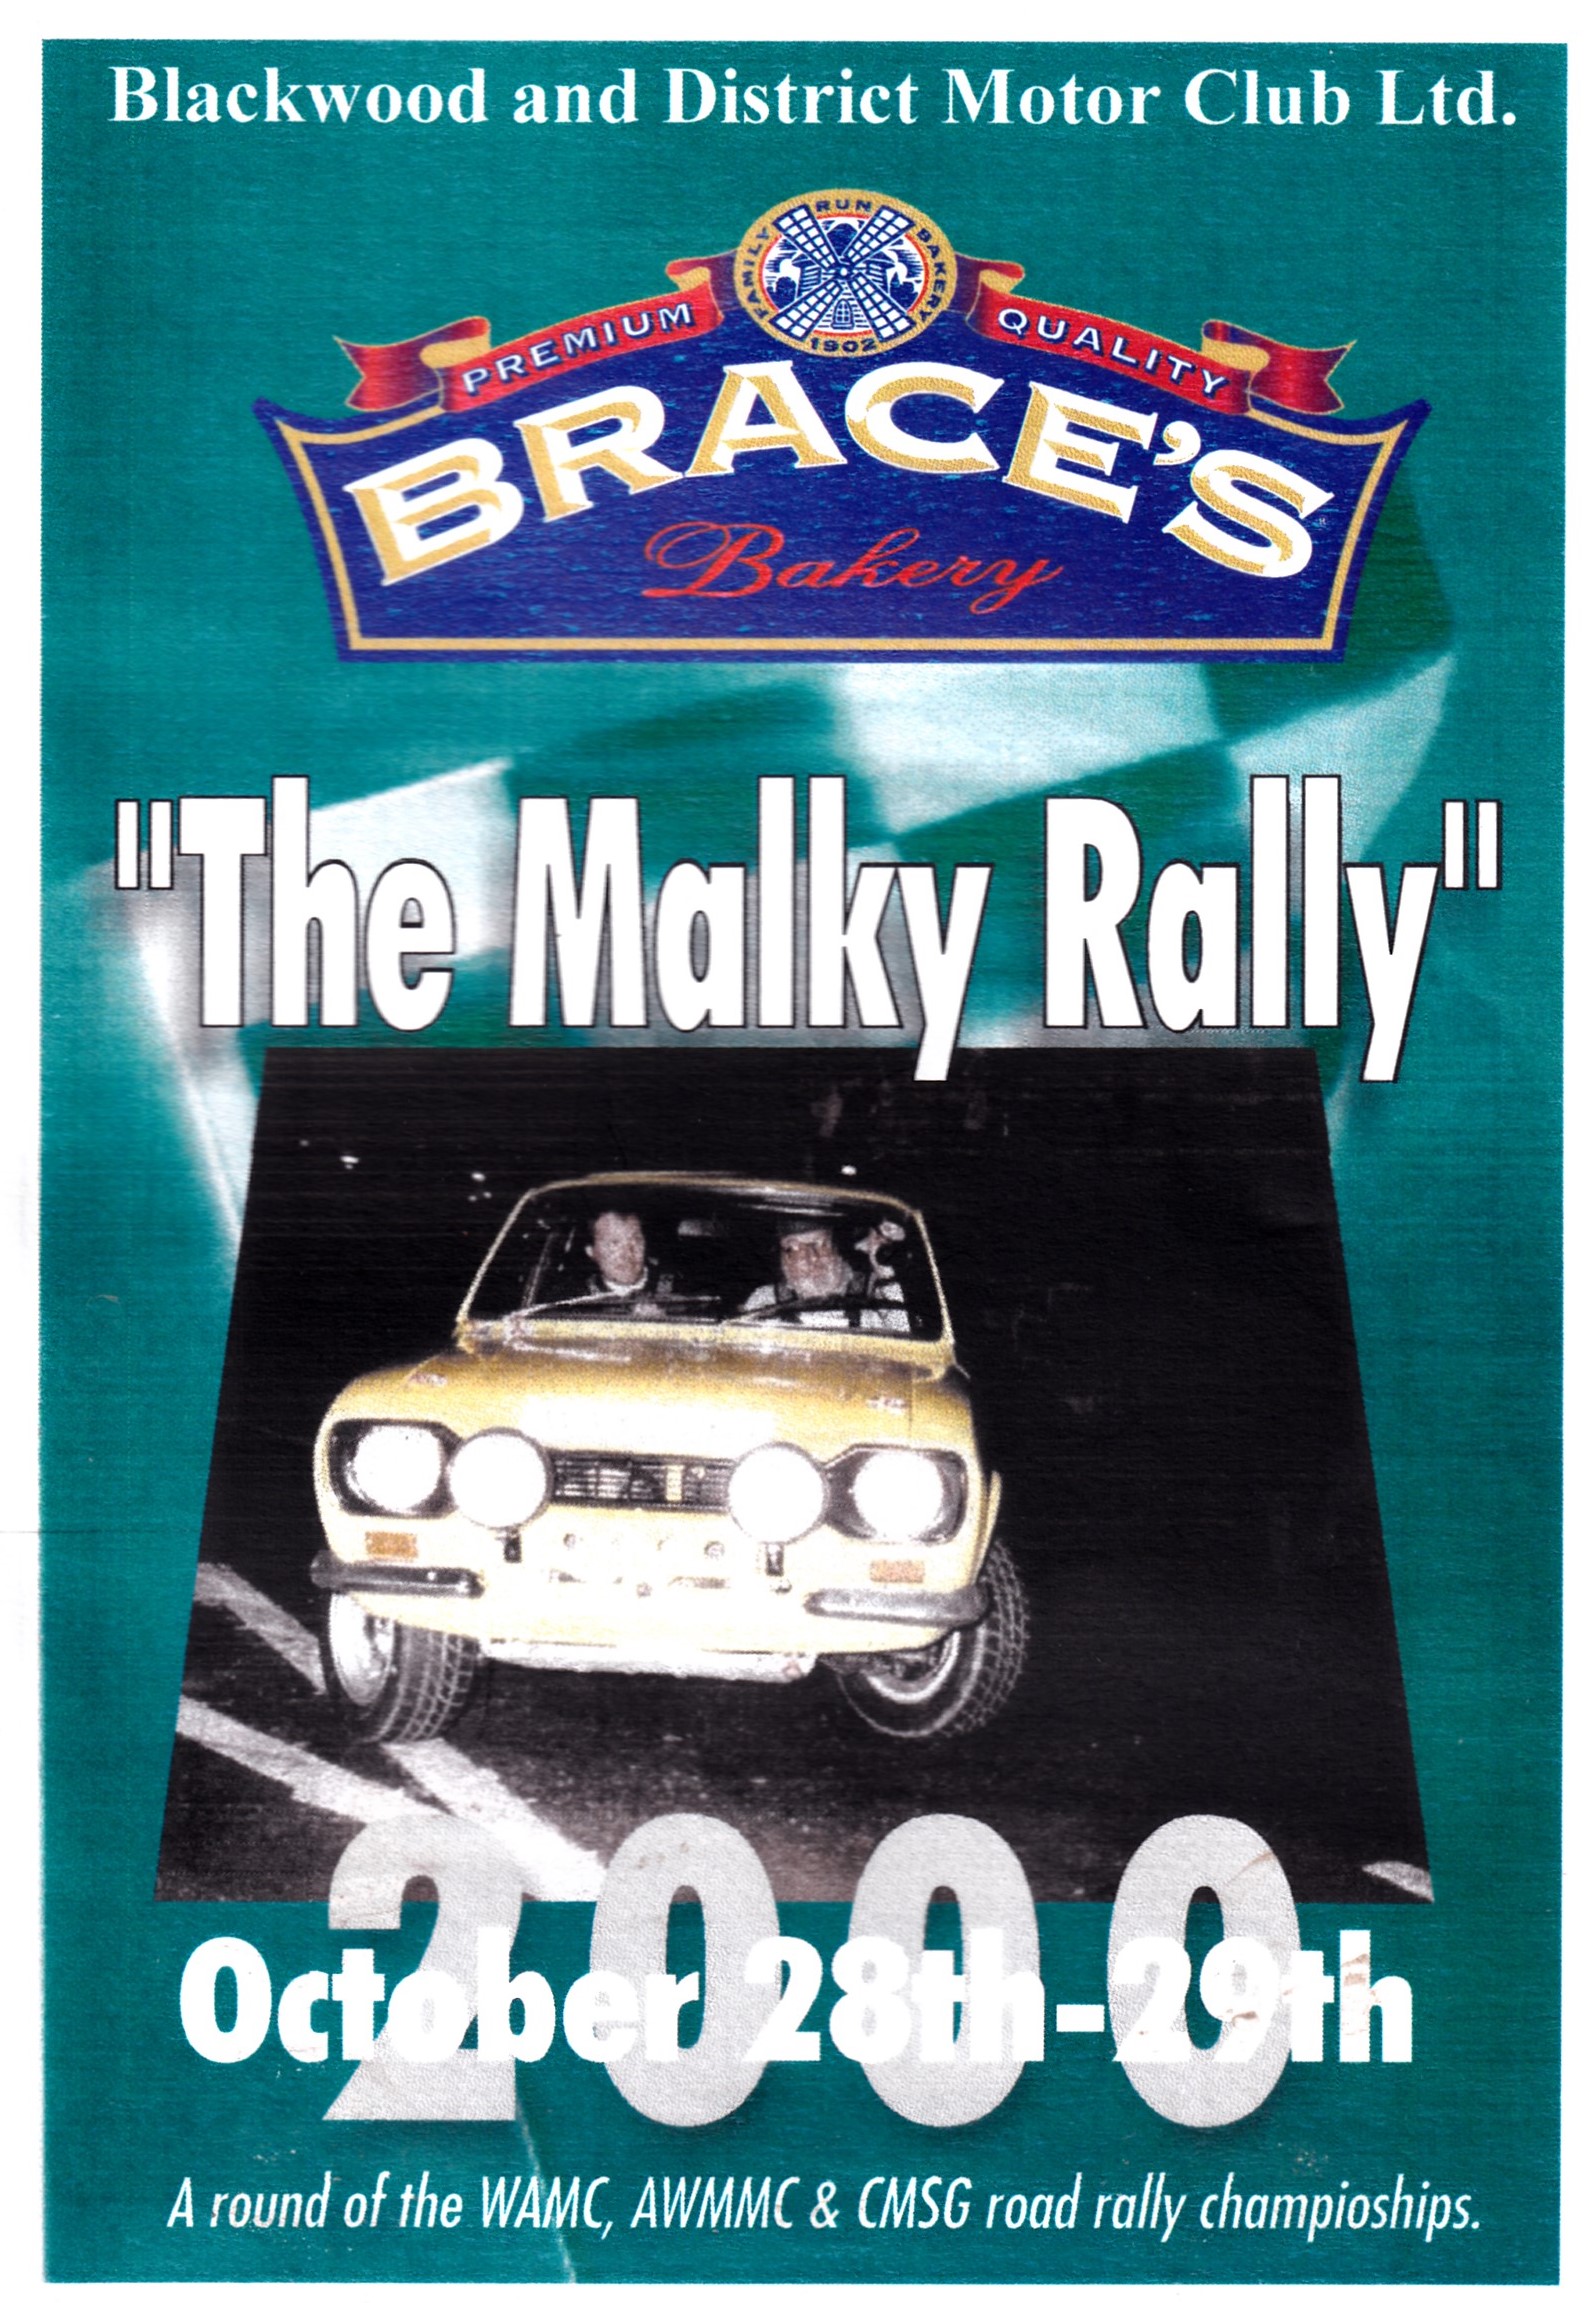 The Malky Rally 2000